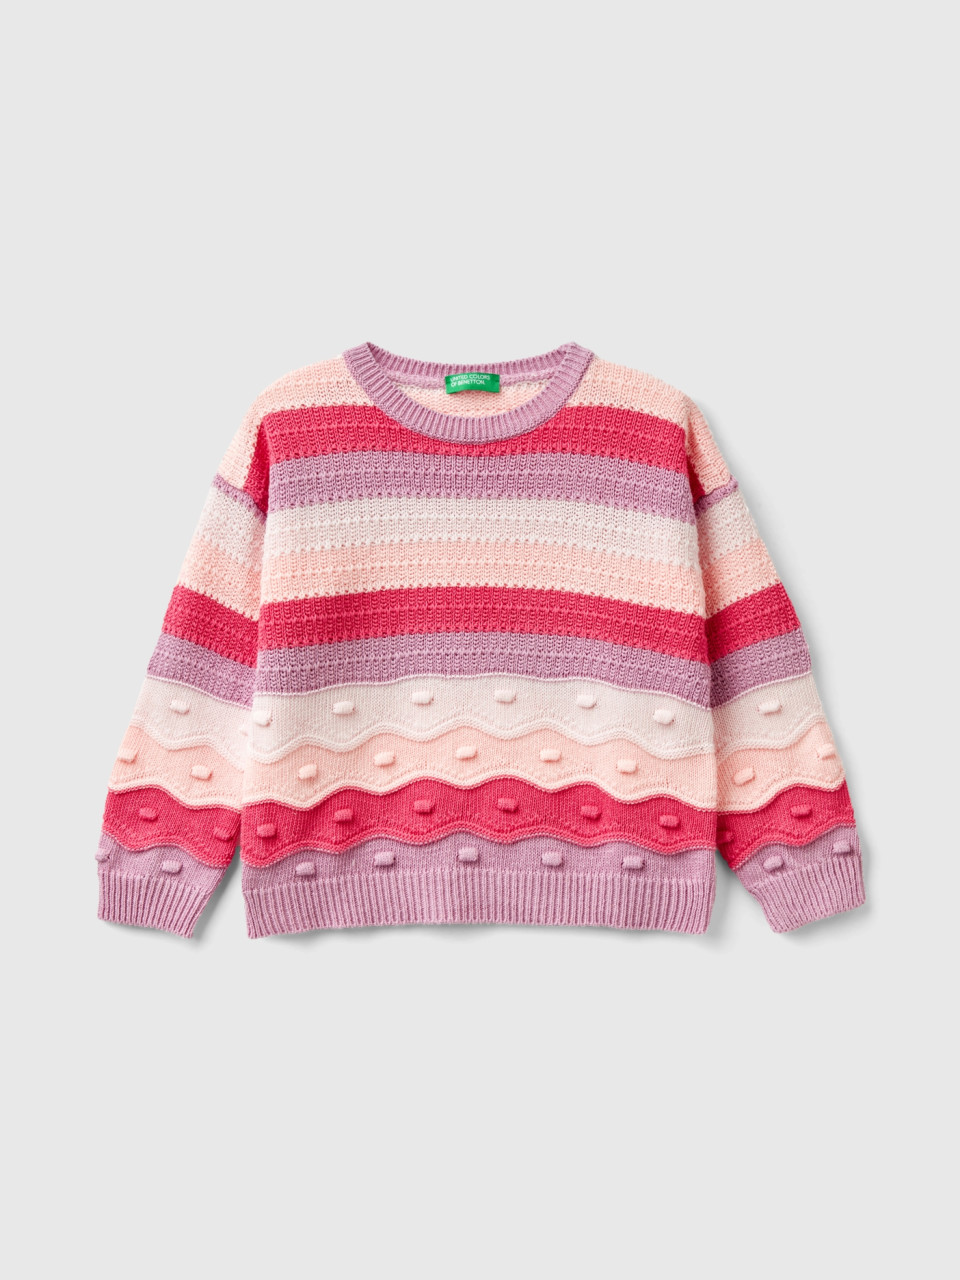 Benetton, Striped Sweater In Recycled Cotton Blend, Multi-color, Kids